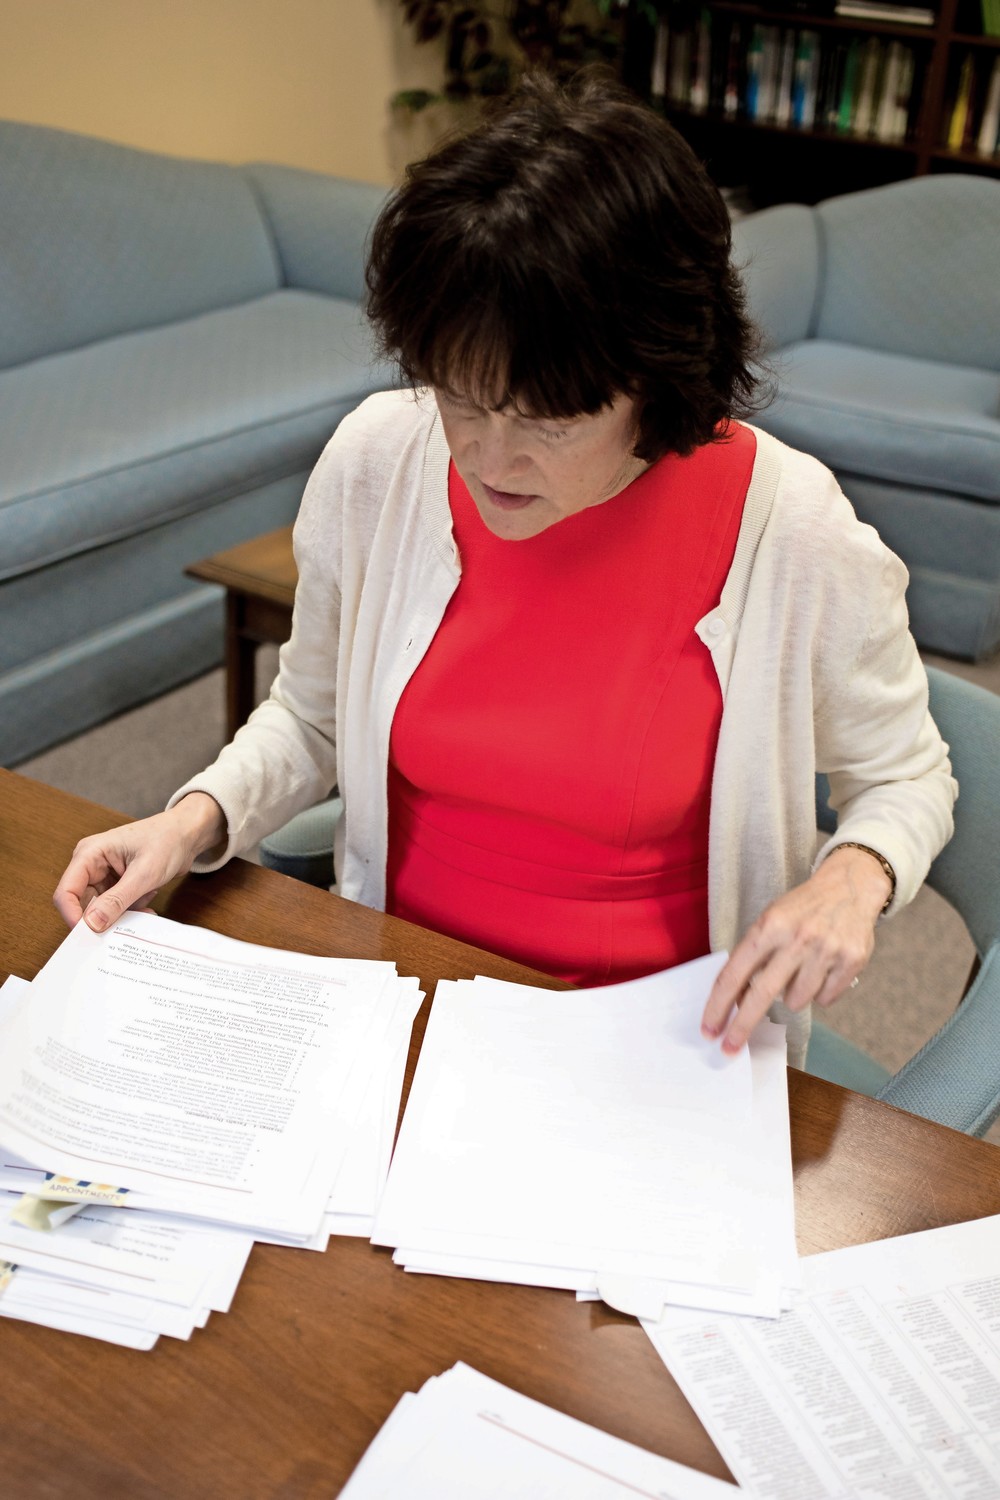 Janet Rovenpor, associate dean of Manhattan College?s School of Business, looks through paper work in a meeting with Aileen Farrelly, an assistant dean.